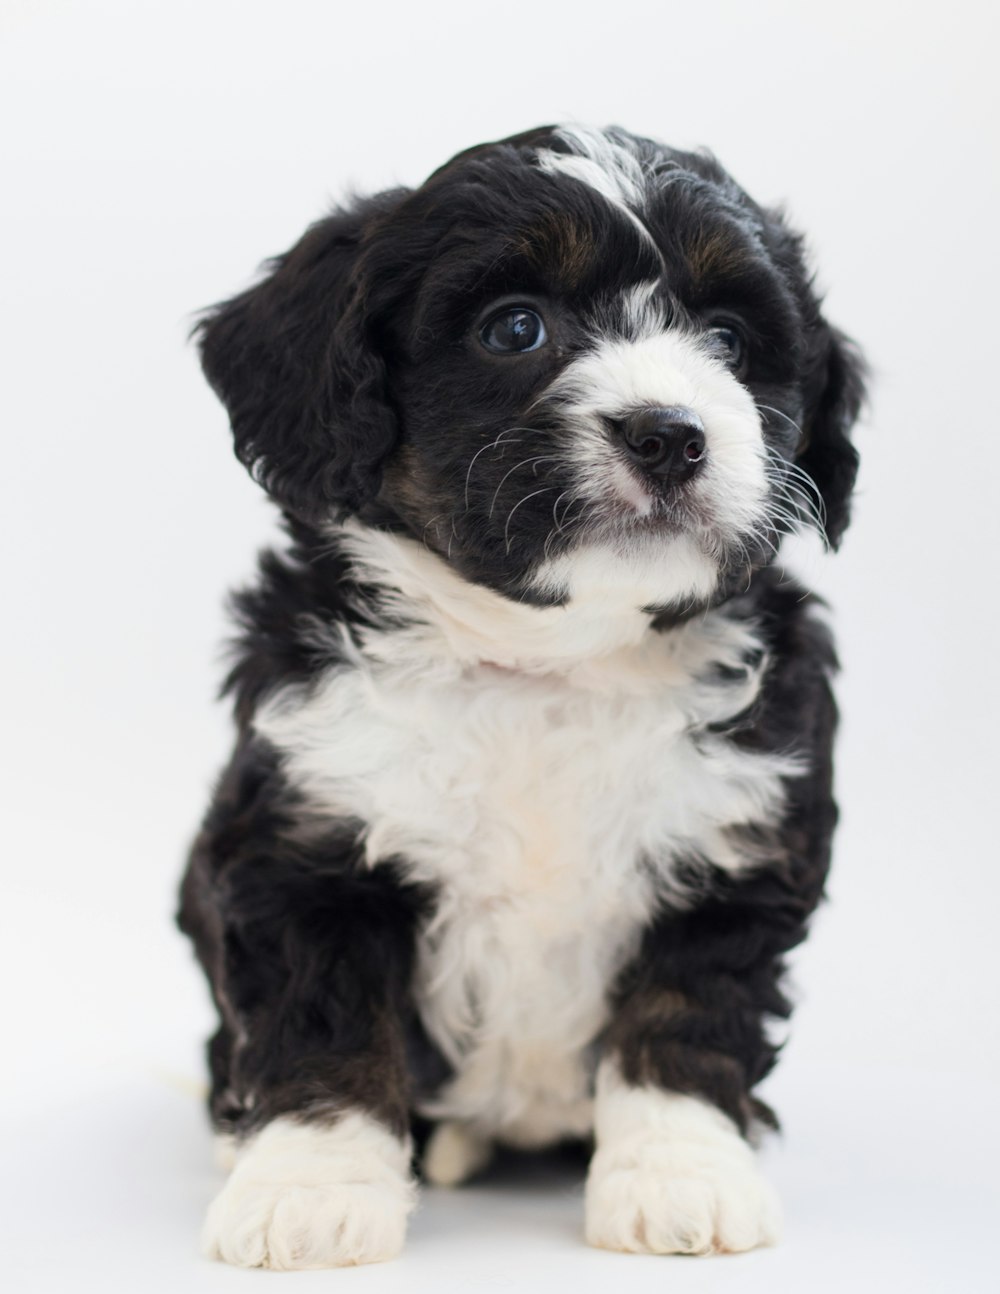 a black and white puppy sitting on a white background